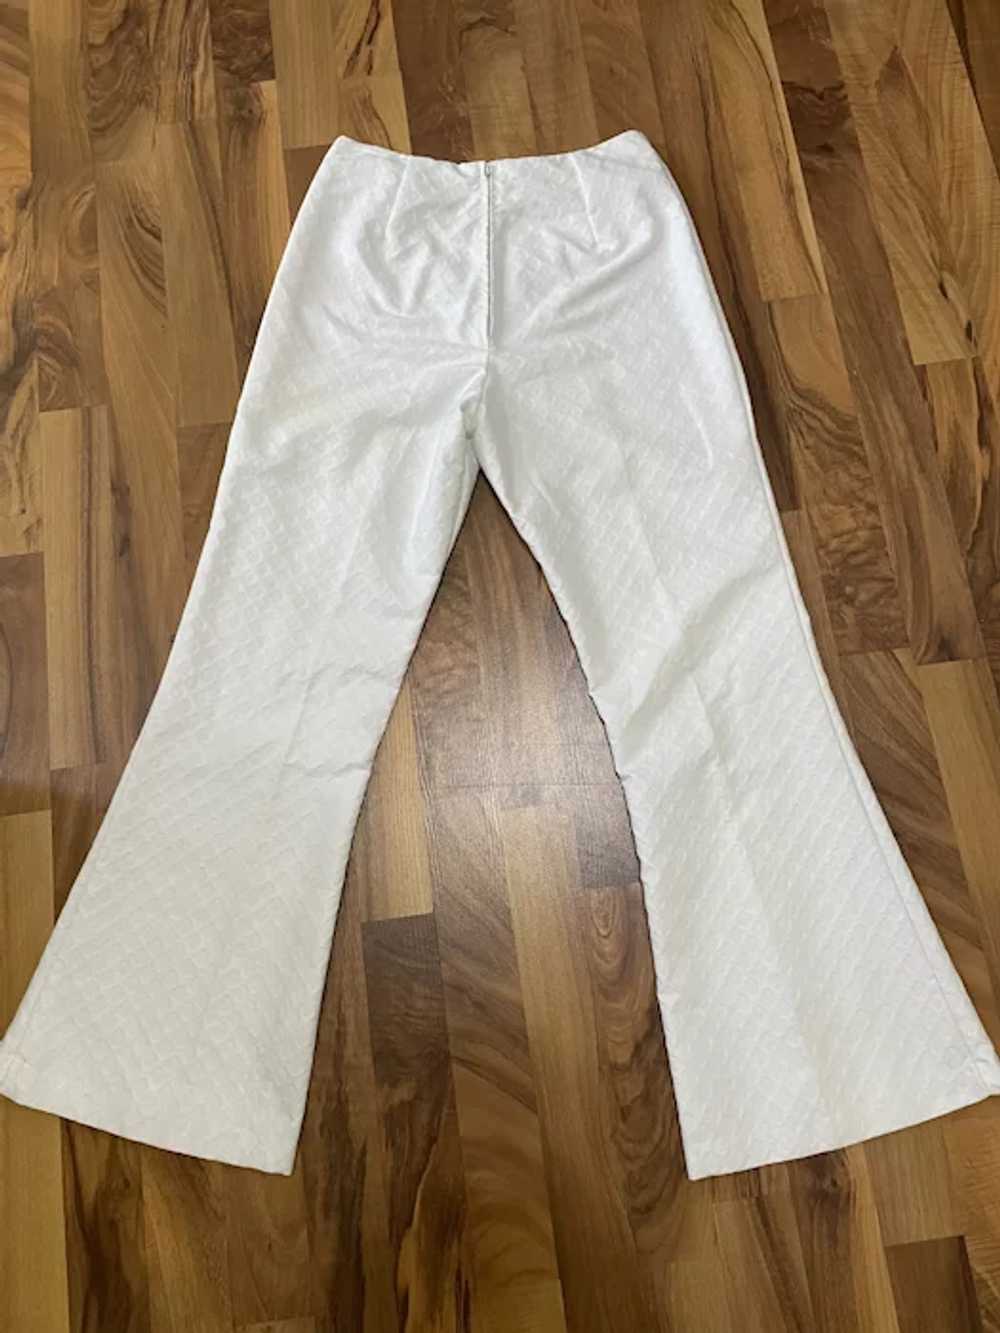 Vintage 1970s Handmade High Waisted Bell Bottoms - image 3